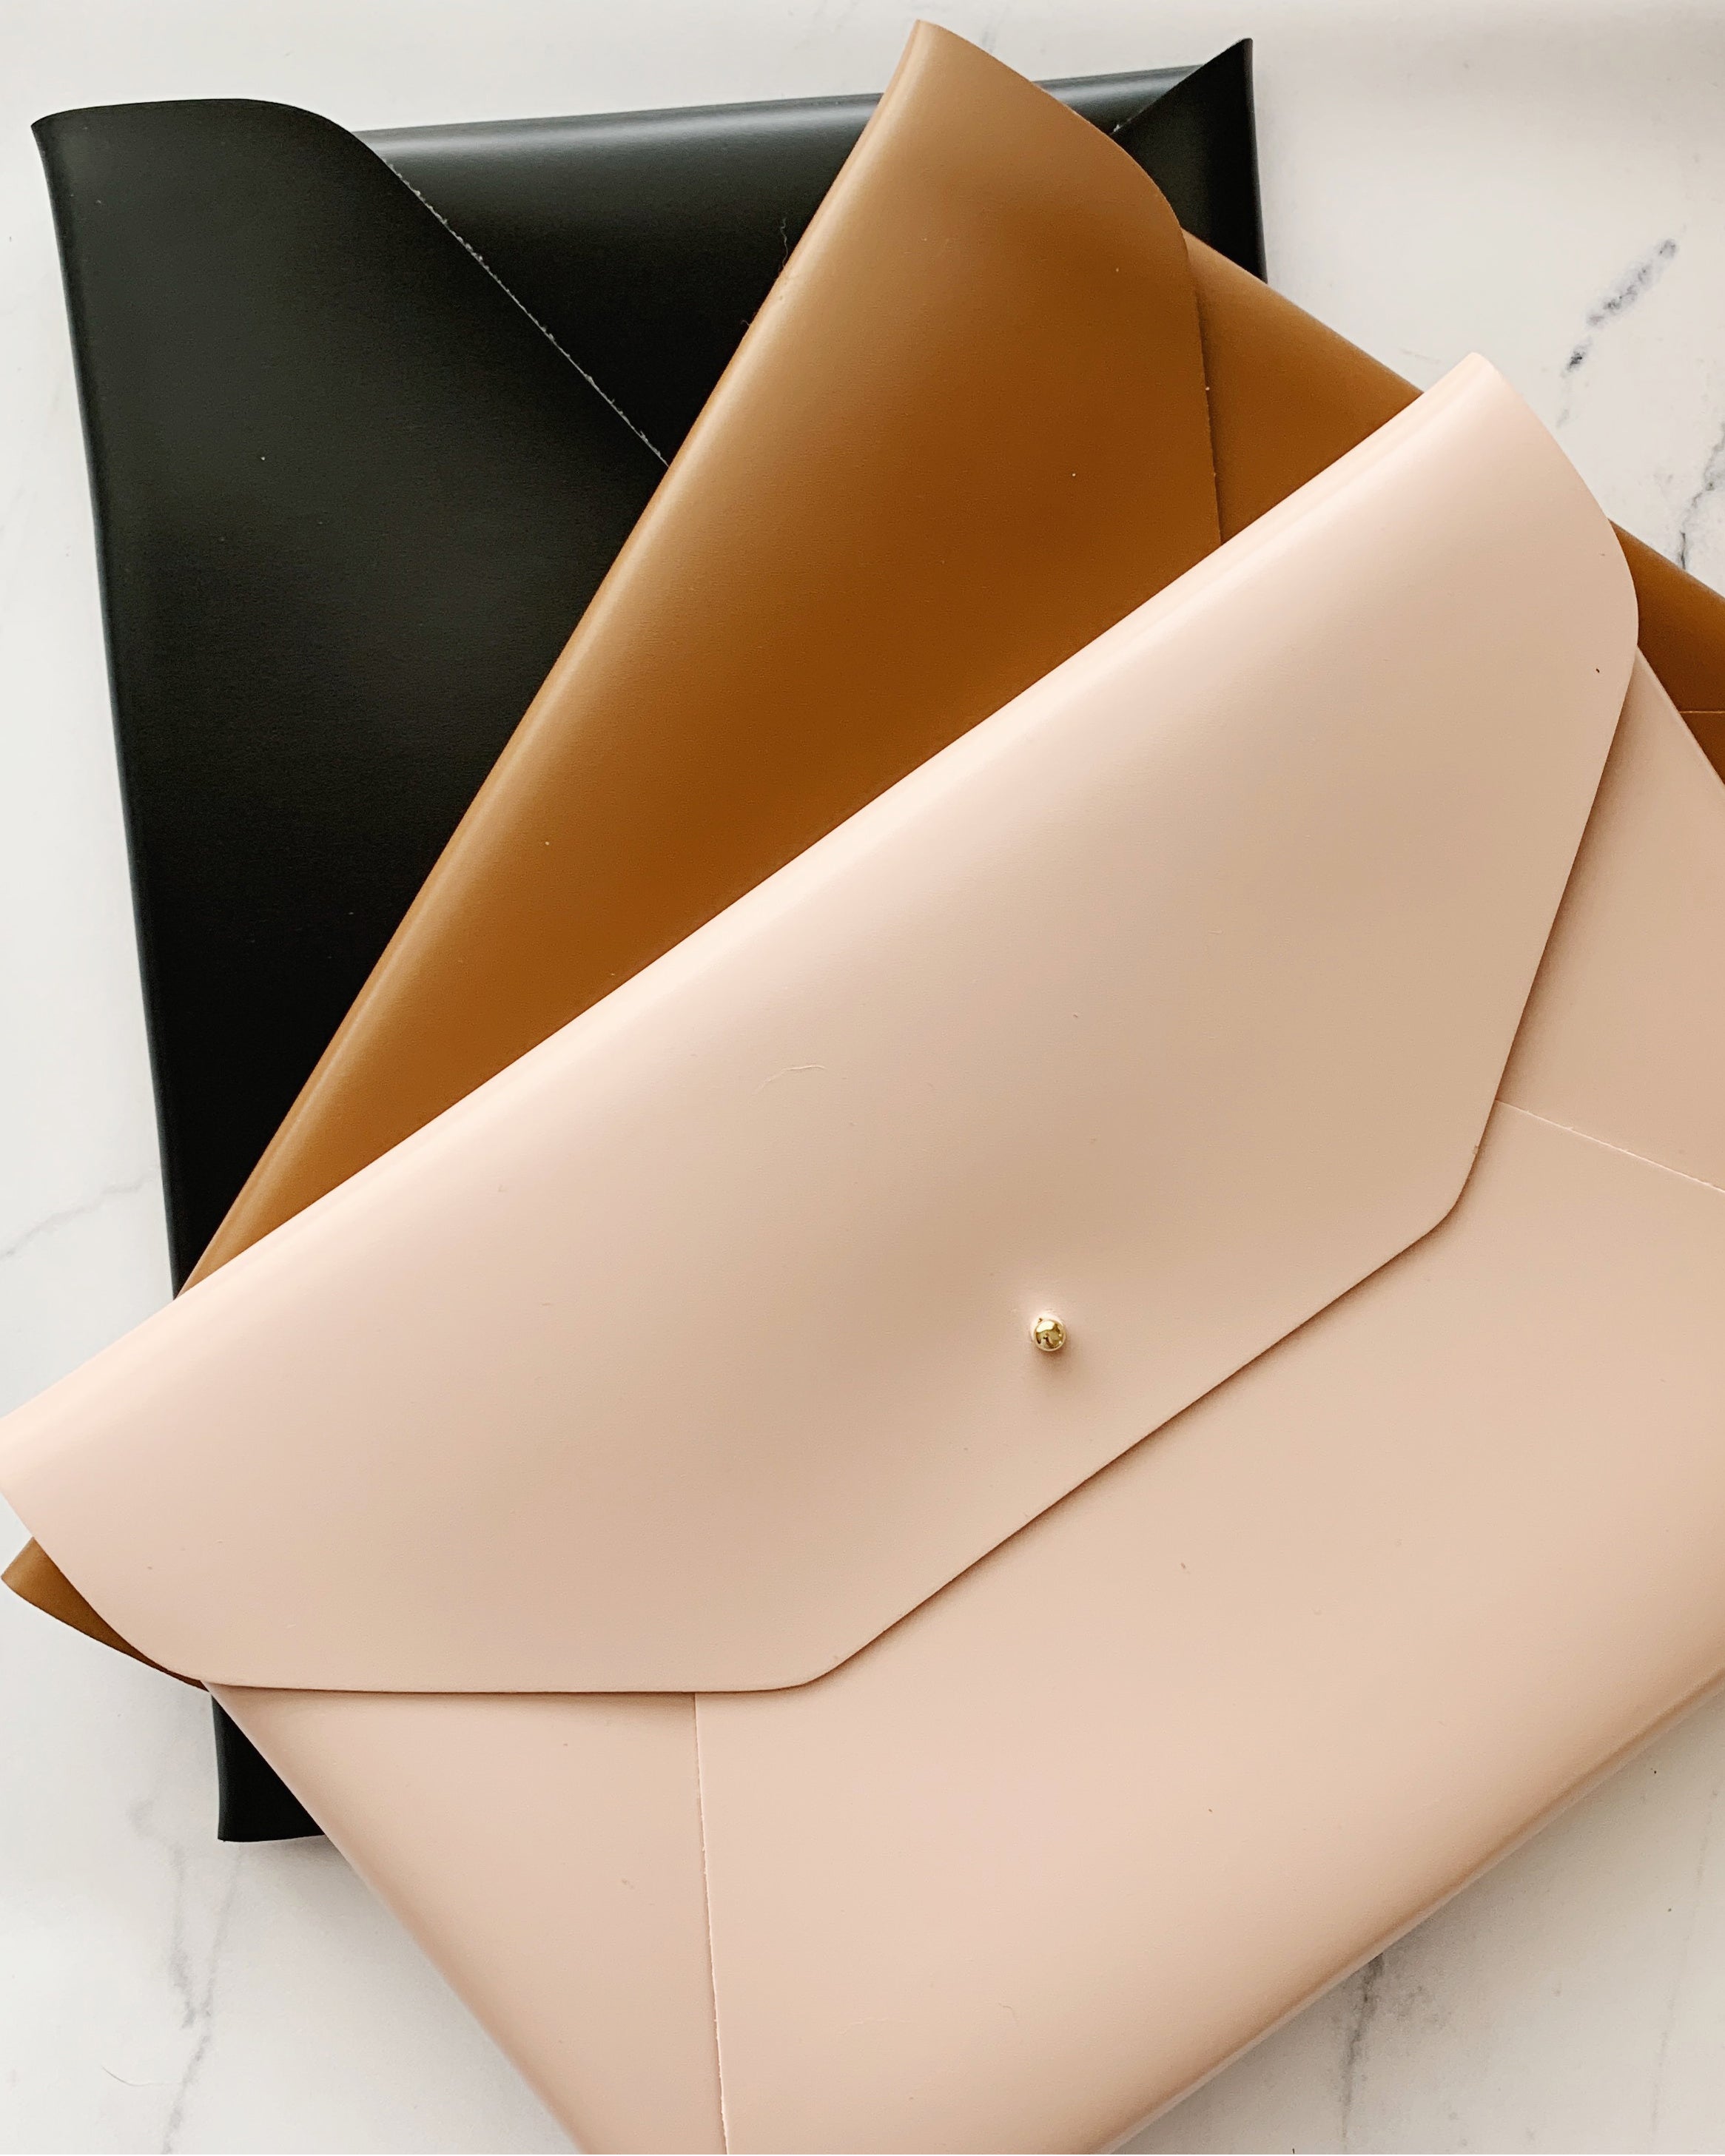 Leather Laptop Sleeves